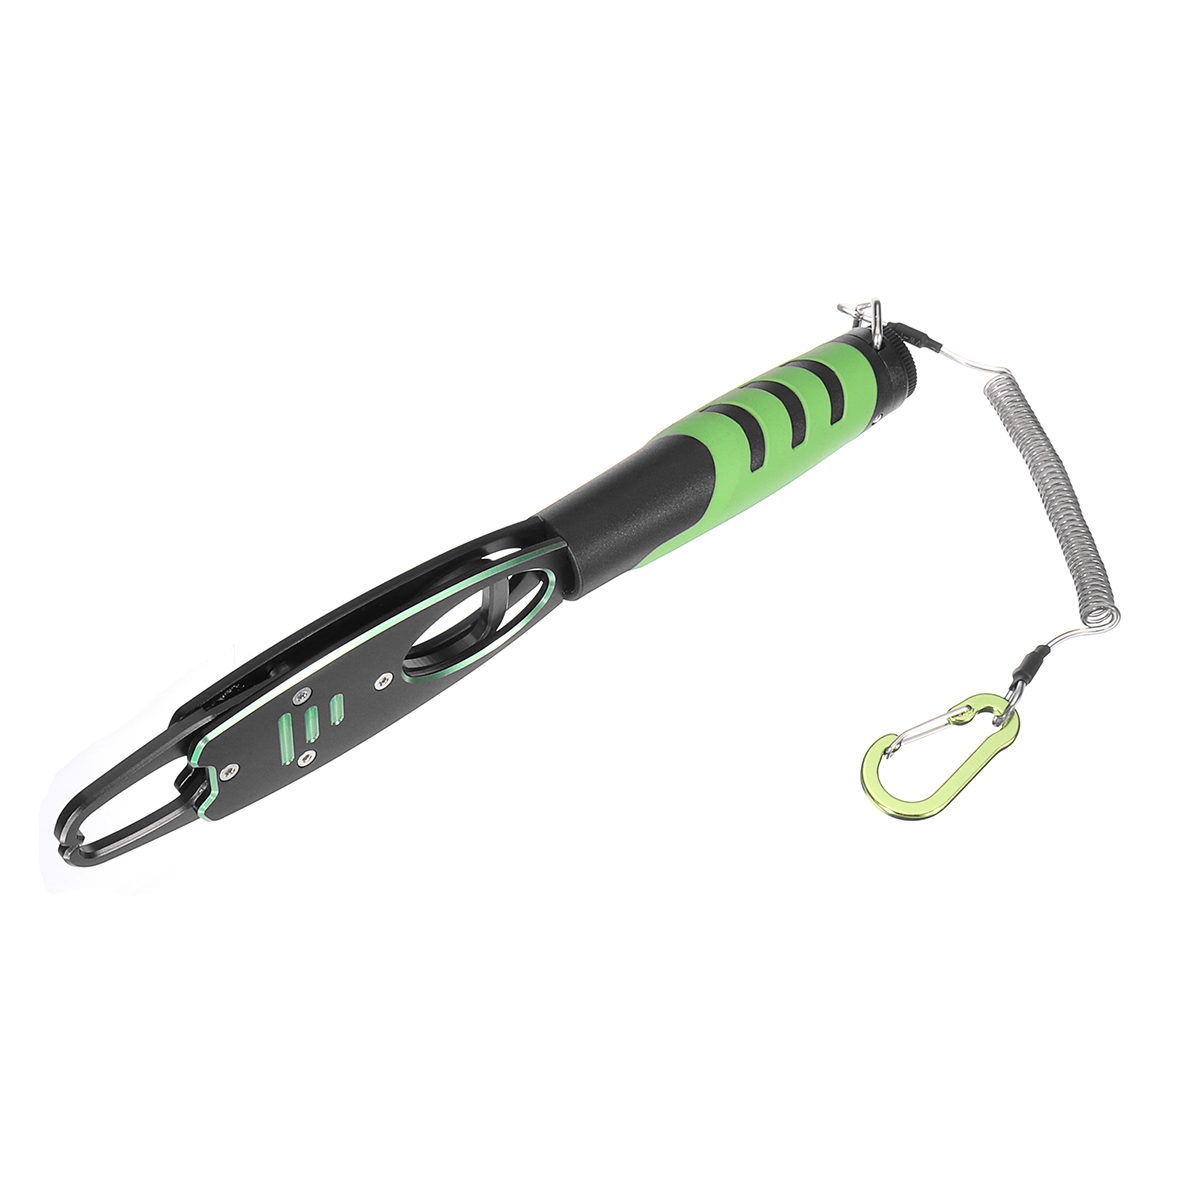 Portable-Aluminum-Alloy-Fishing-Grip-Fishing-Pliers-Split-Ring-Cutters-Line-Hook-Recover-Fishing-Tac-1586129-1